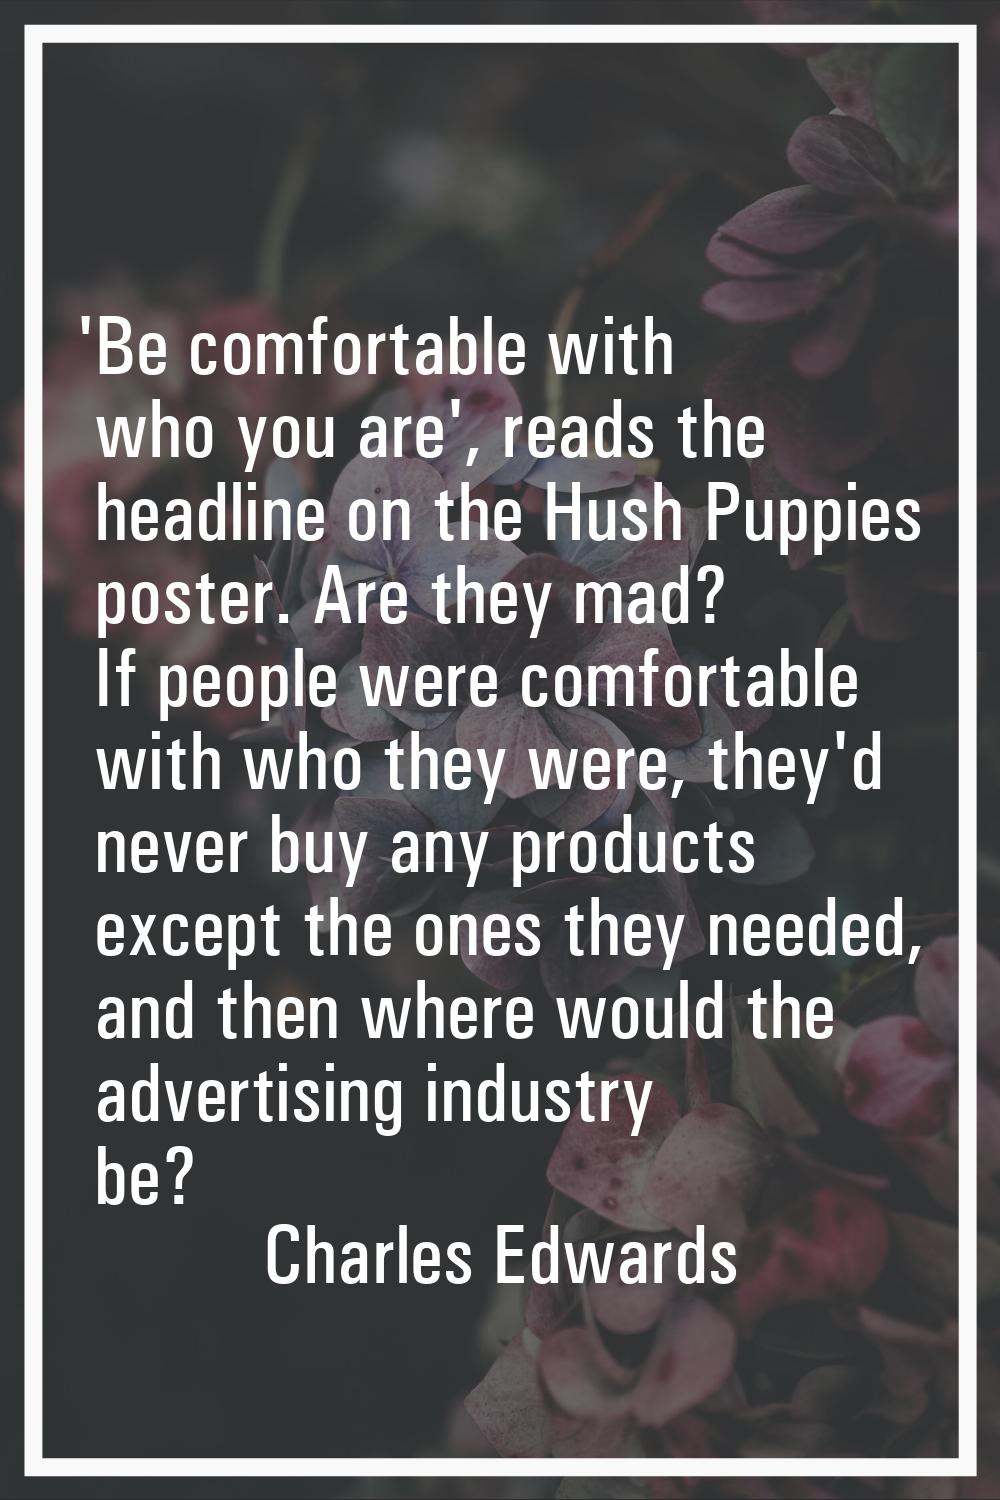 'Be comfortable with who you are', reads the headline on the Hush Puppies poster. Are they mad? If 